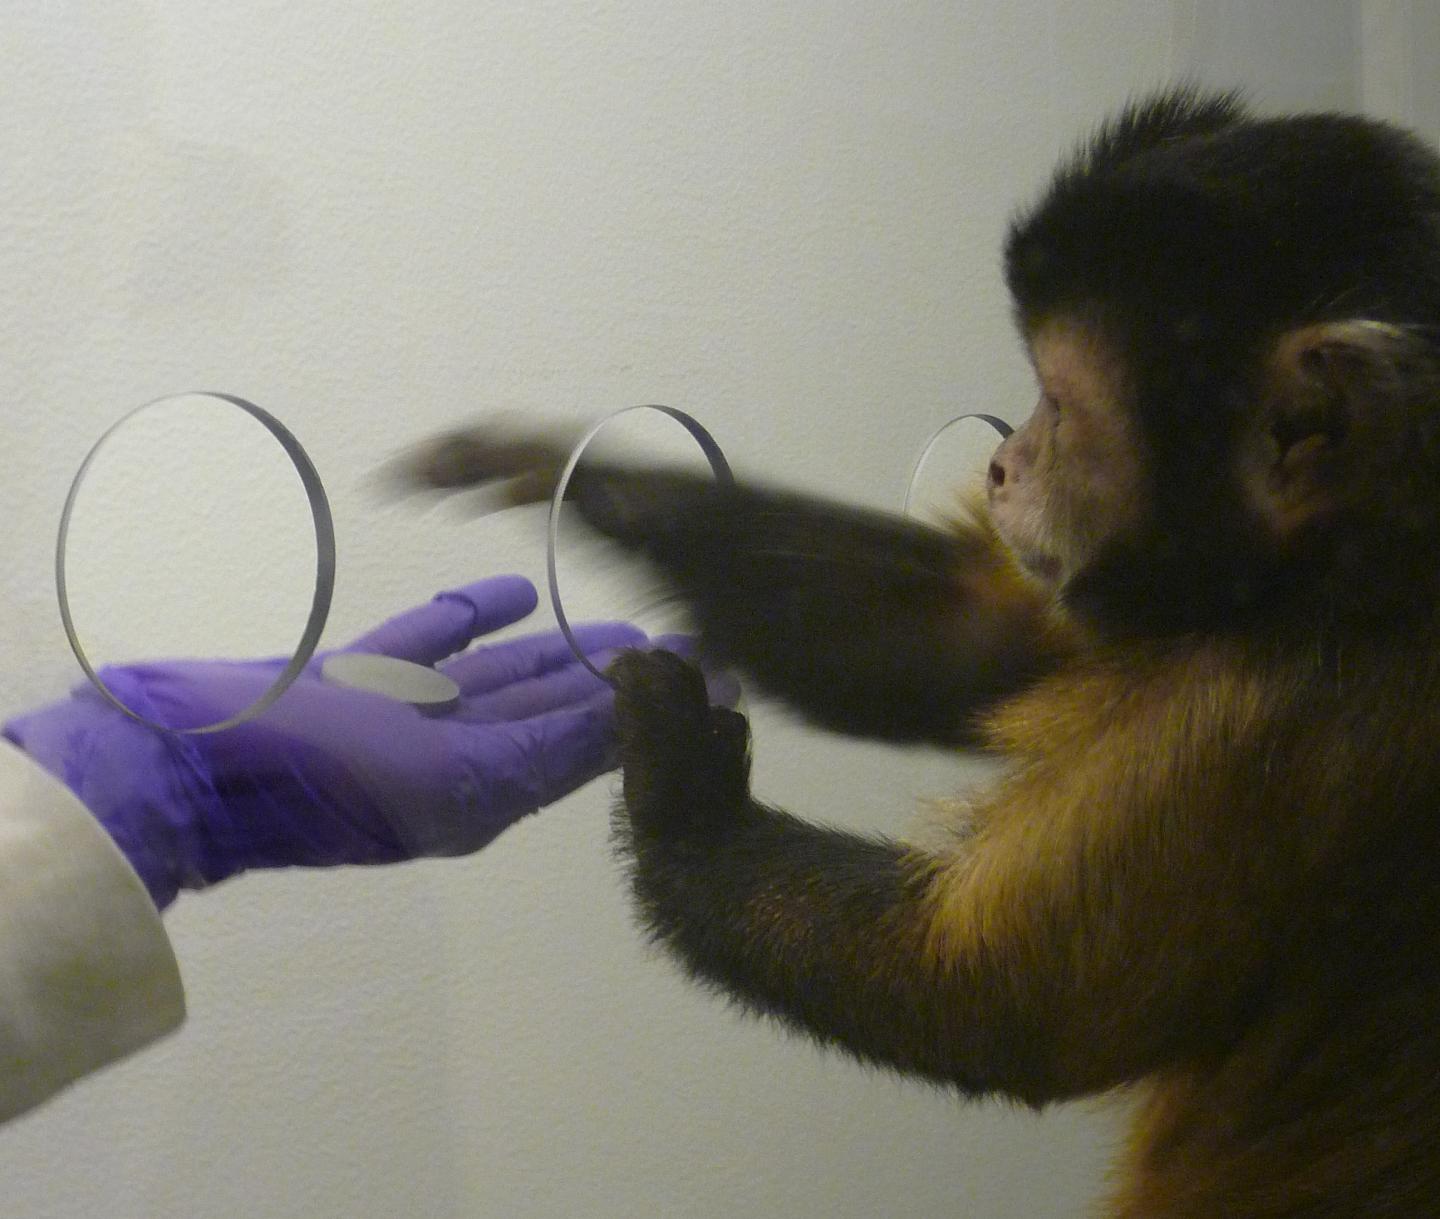 Unlike Humans, Monkeys Aren't Fooled by Expensive Brands